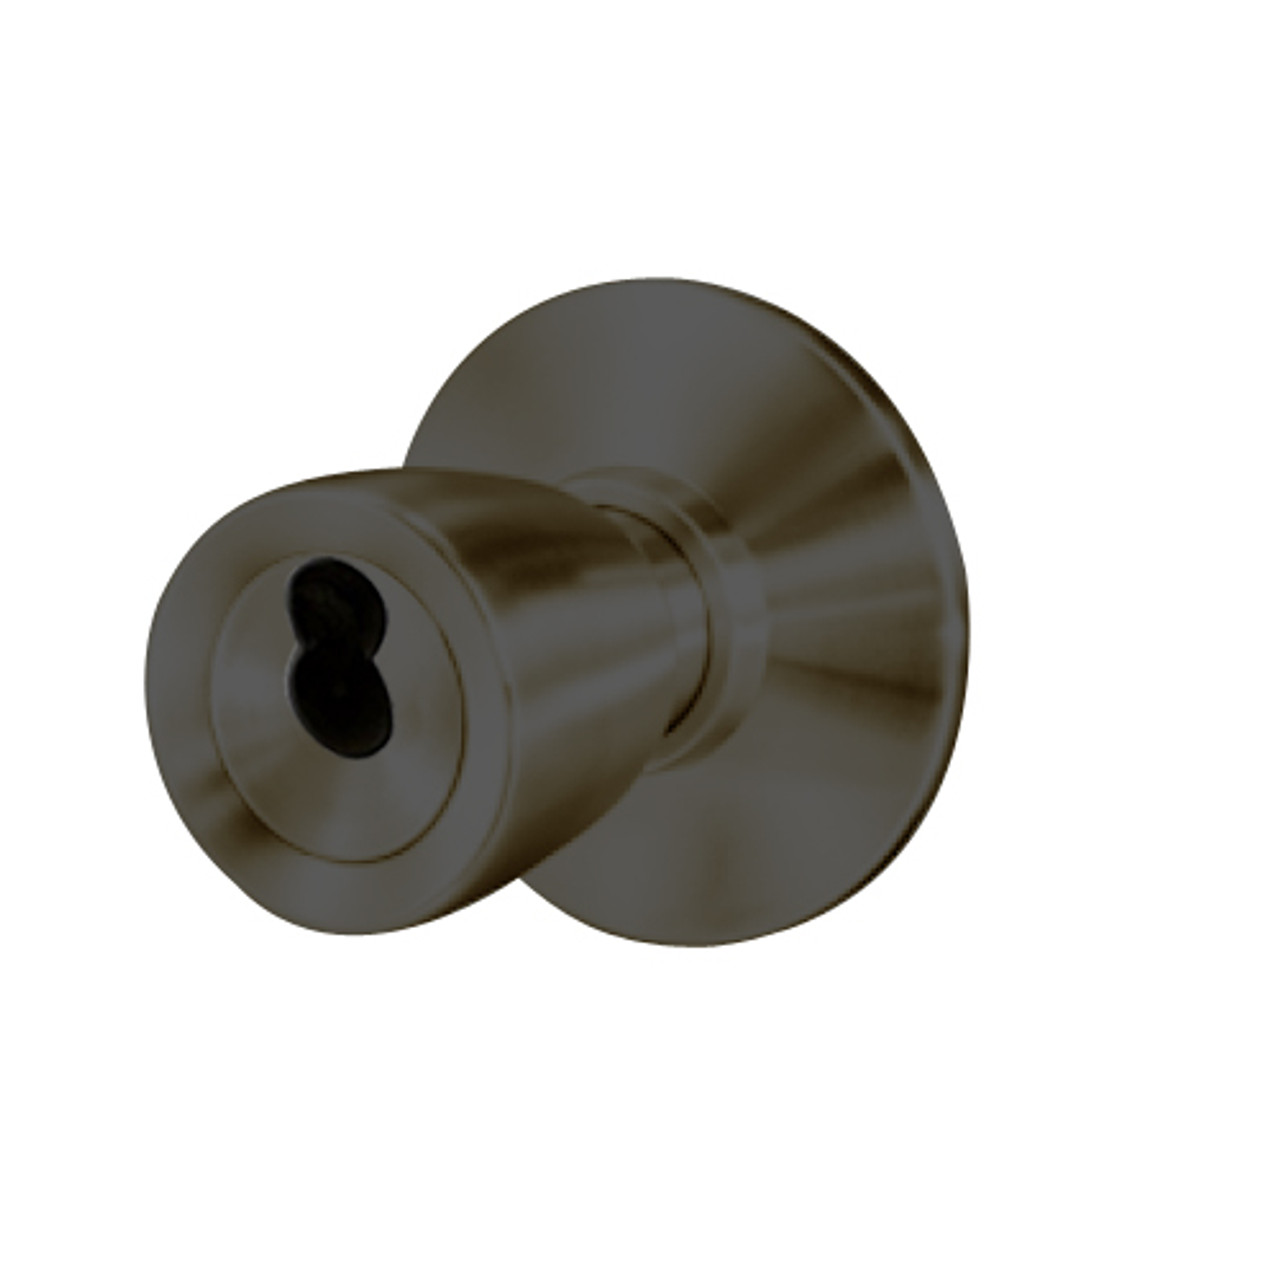 8K57RZ6DS3613 Best 8K Series Closet or Storeroom Heavy Duty Cylindrical Knob Locks with Tulip Style in Oil Rubbed Bronze